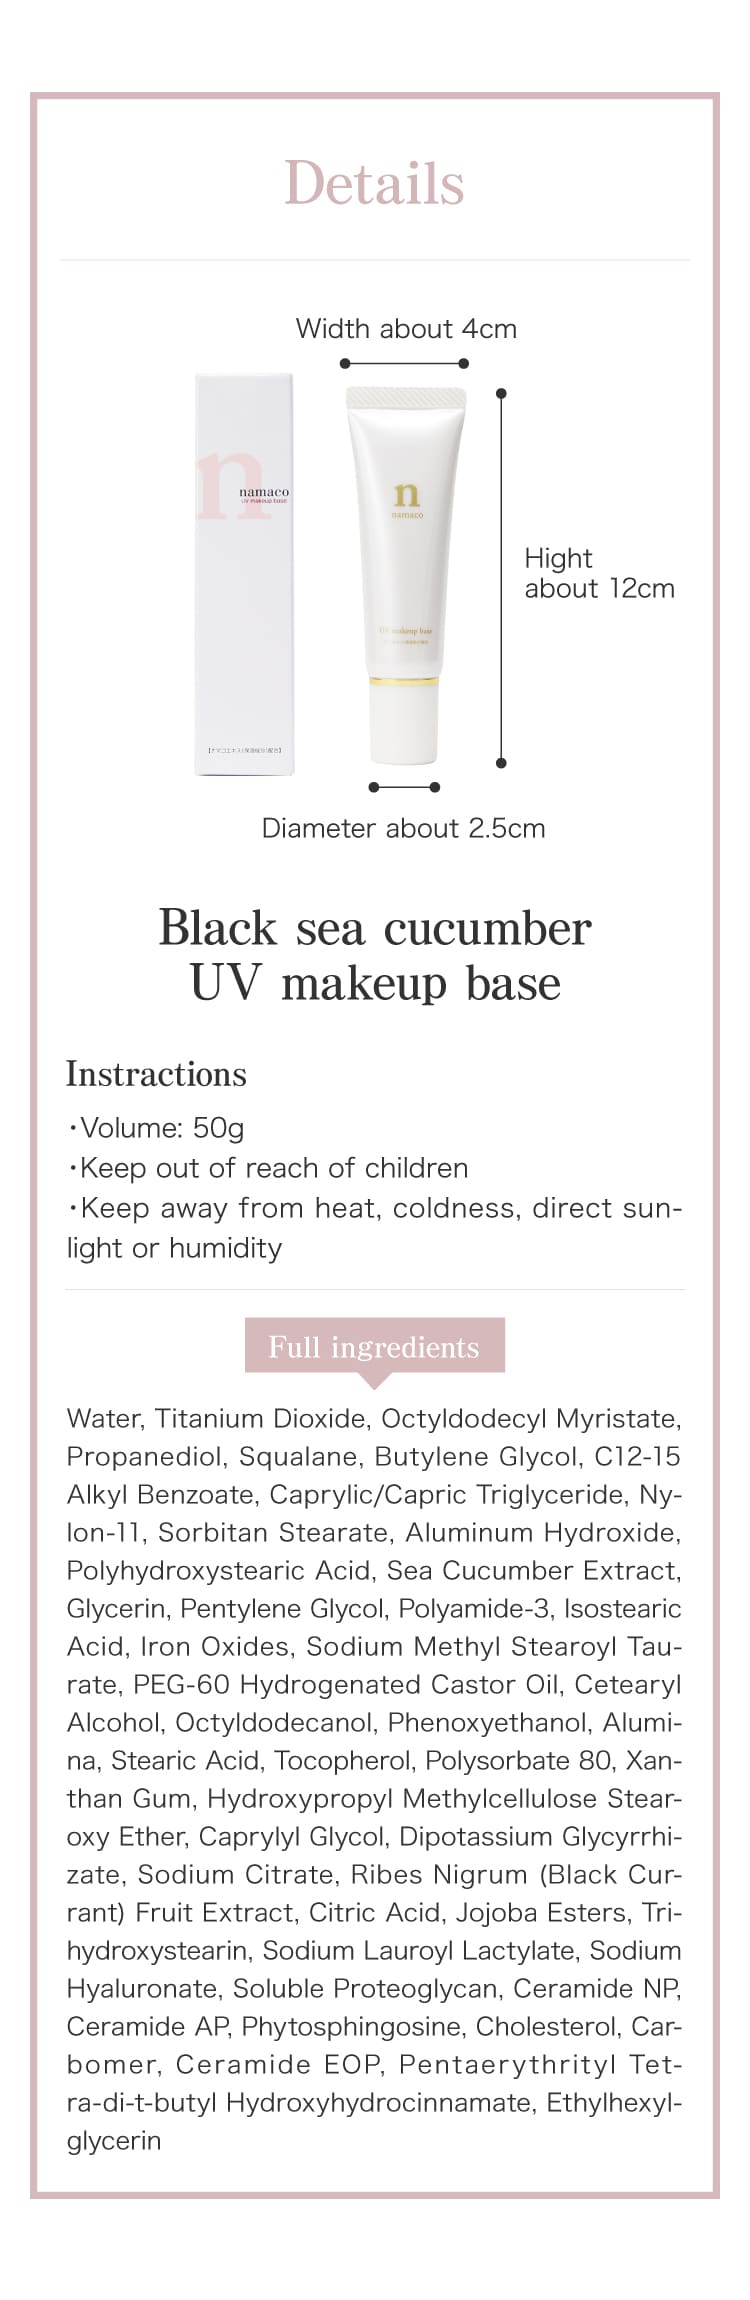 The dimensions of the black sea cucumber UV makeup base 50g is Hight about 12cm, Diameter about 2.5cm